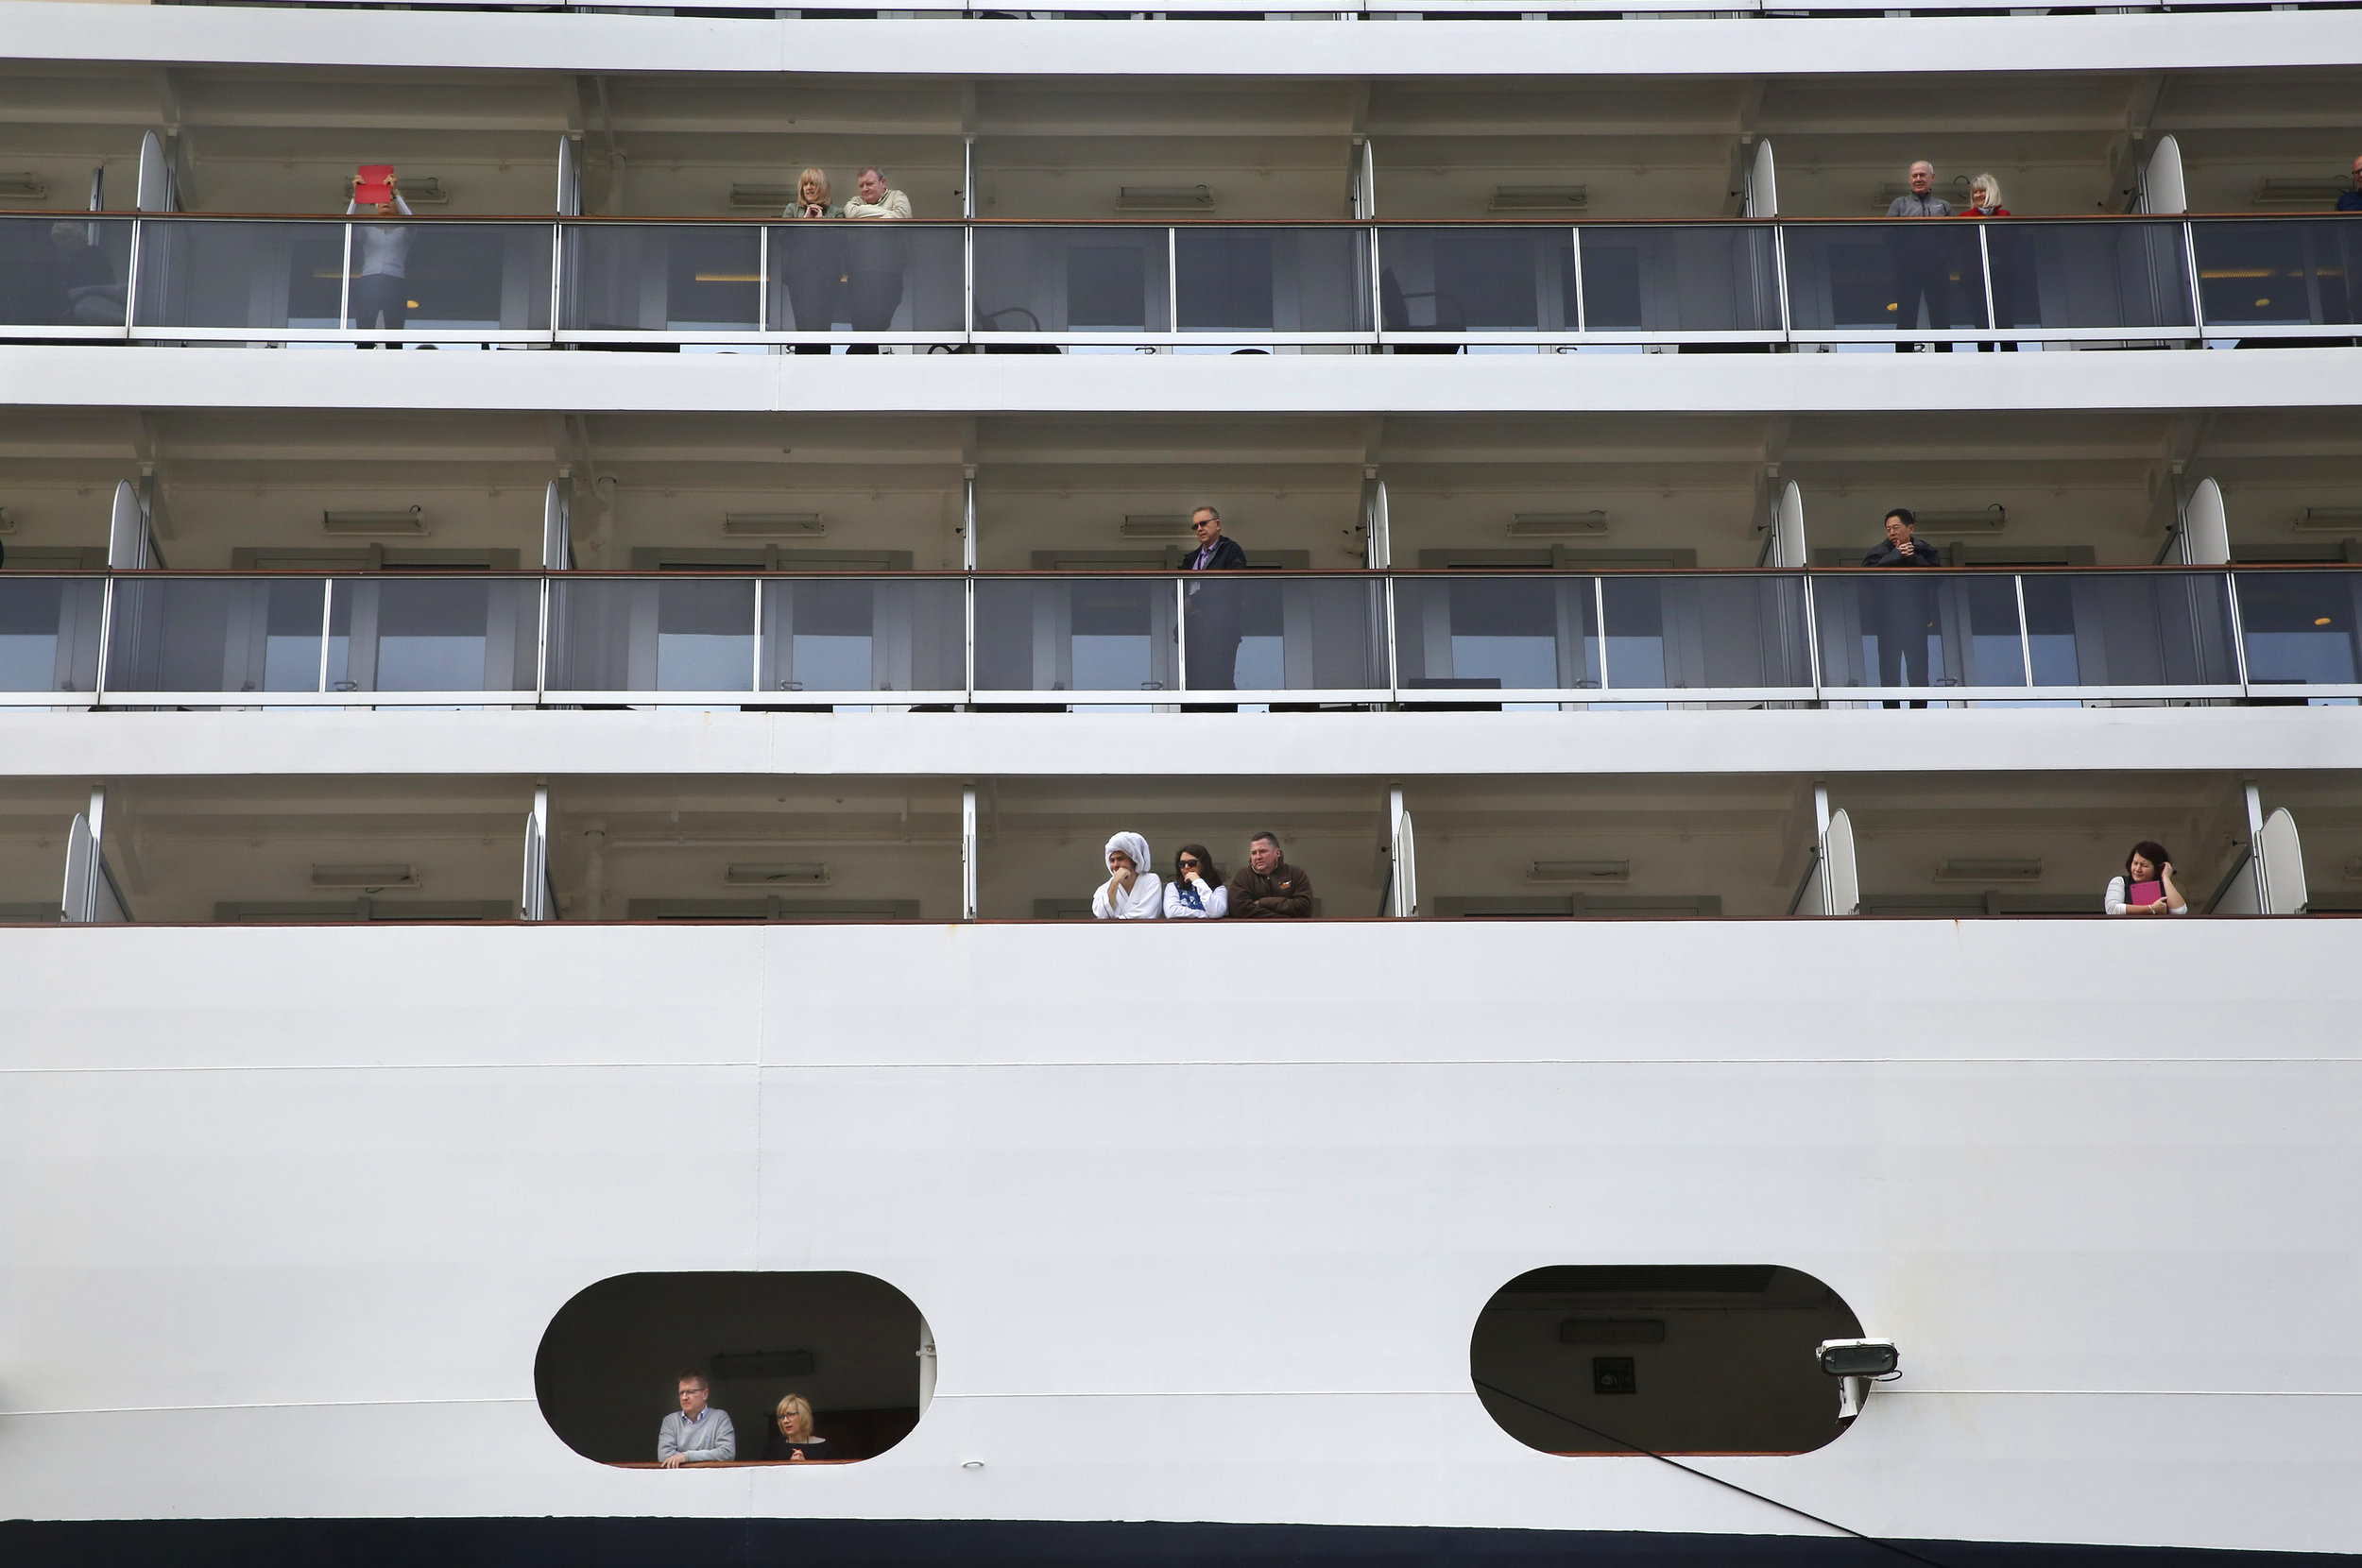 Passengers aboard the Nieuw Amsterdam cruise ship look out at Ketchikan. (Photo by Elissa Nadworny/NPR)